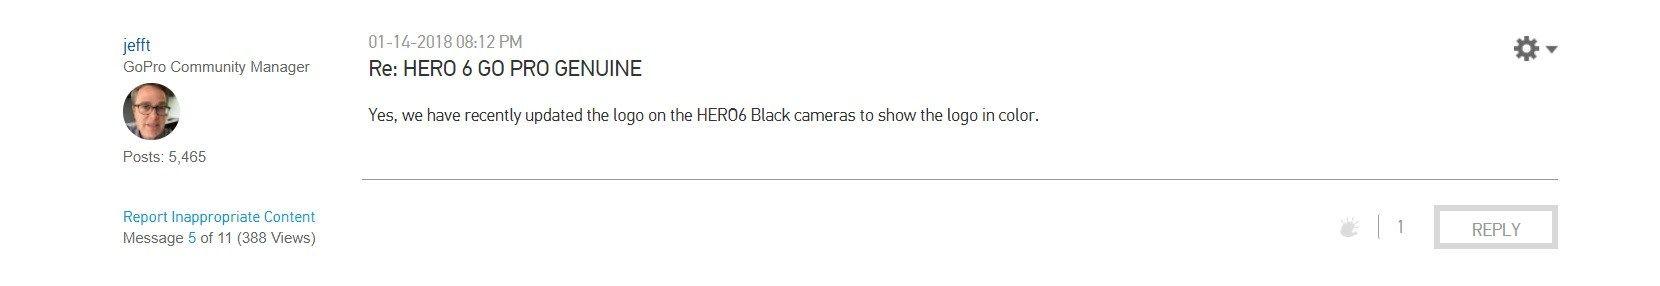 White GoPro Logo - GoPro HERO6 Colored and Gray Logo - What's the Difference?